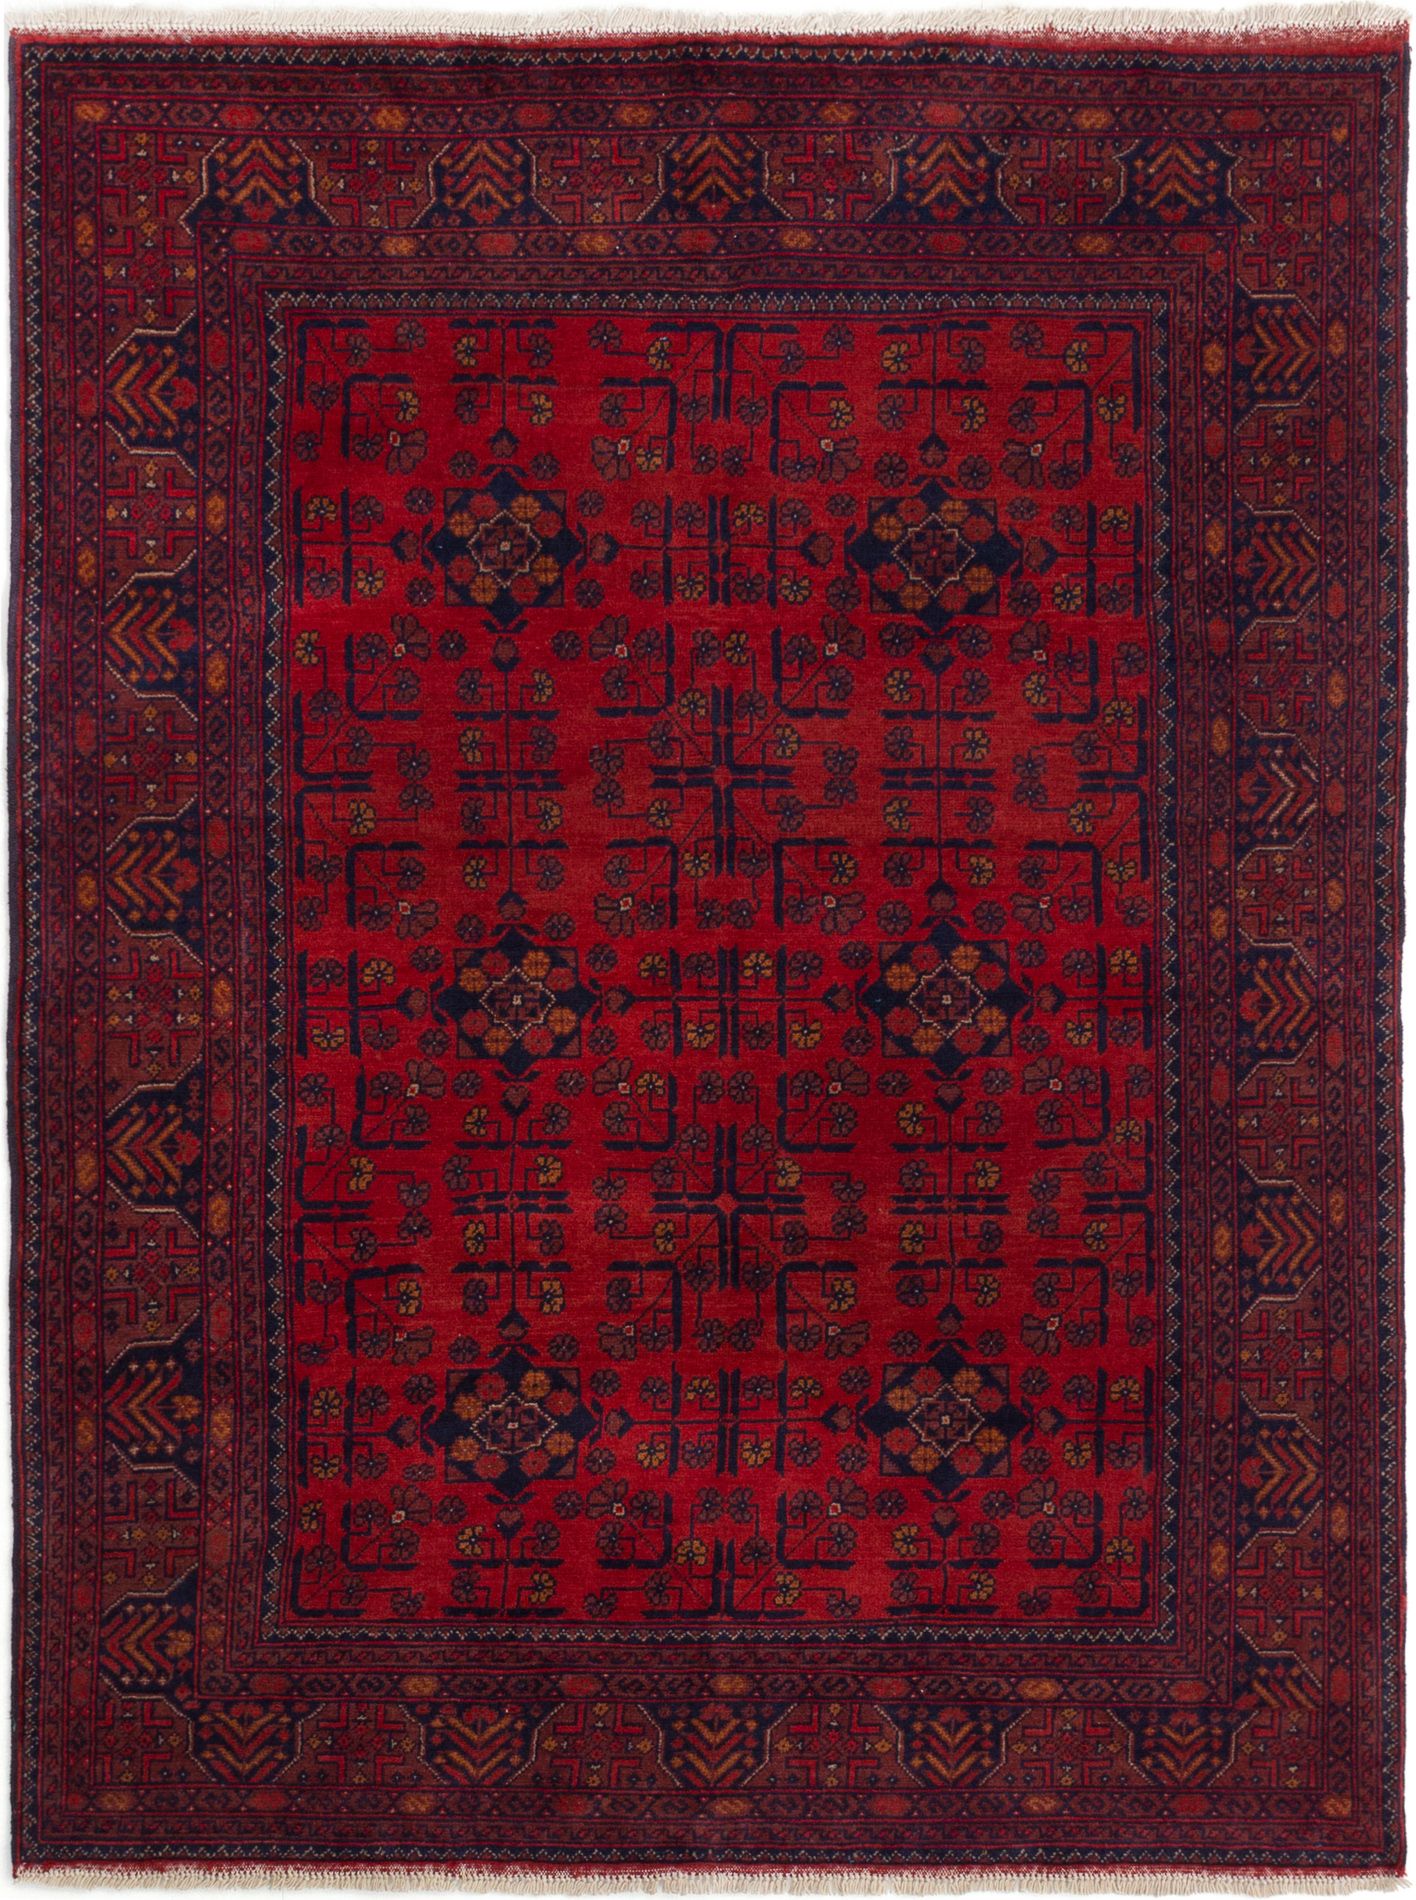 Hand-knotted Finest Khal Mohammadi Red Wool Rug 4'11" x 6'6"  Size: 4'11" x 6'6"  